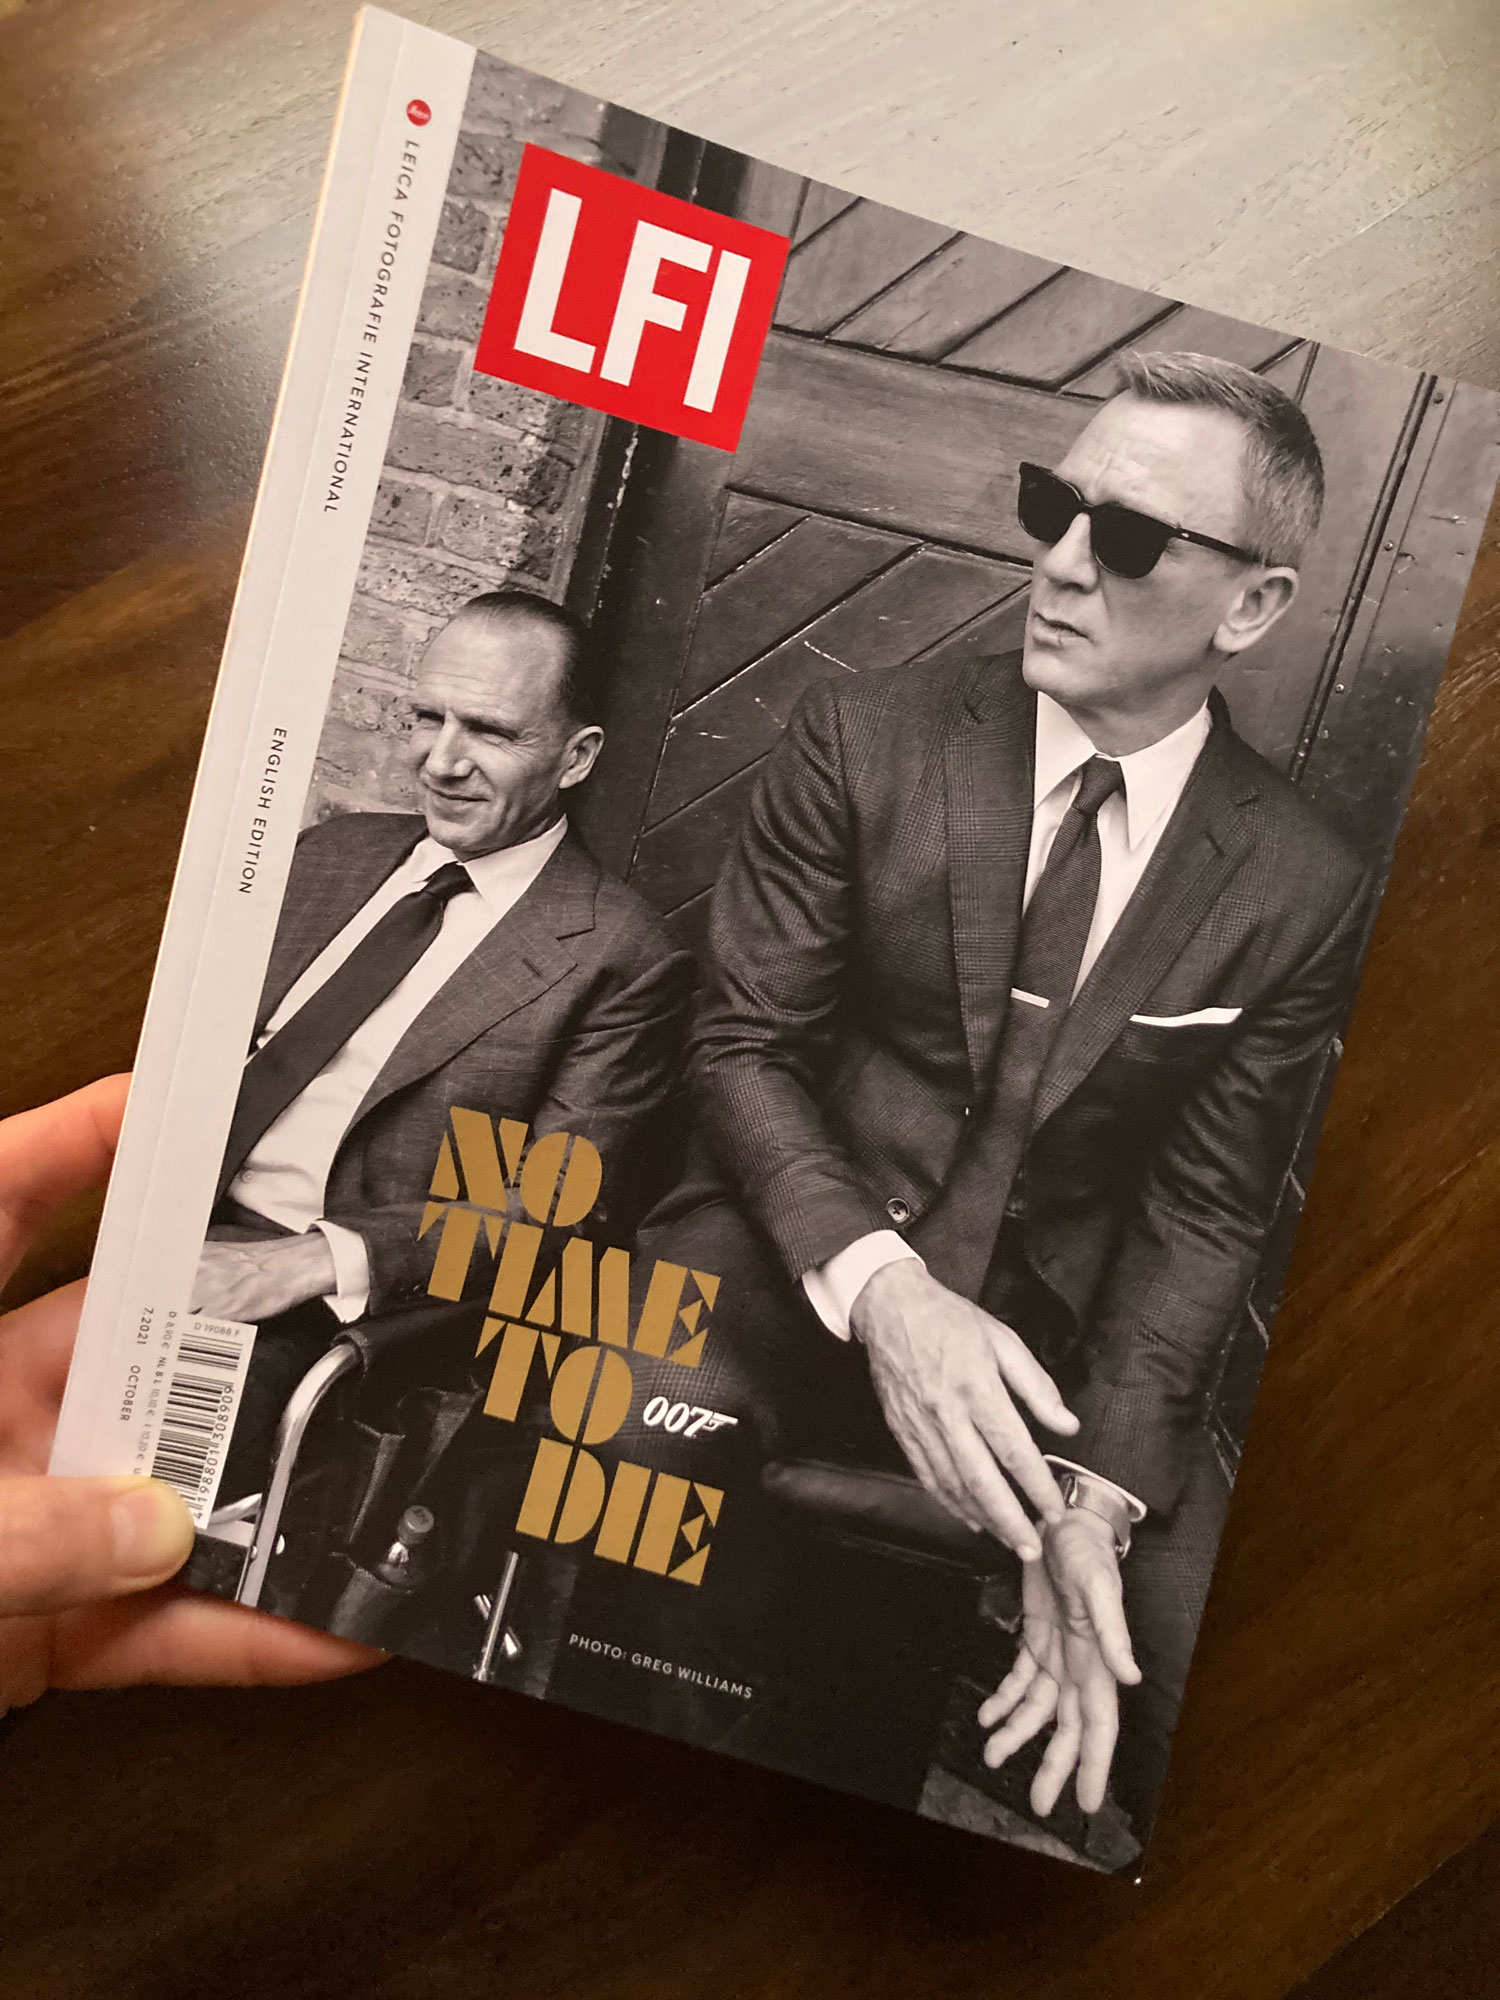 LFI magazine of No Time to die promo cover